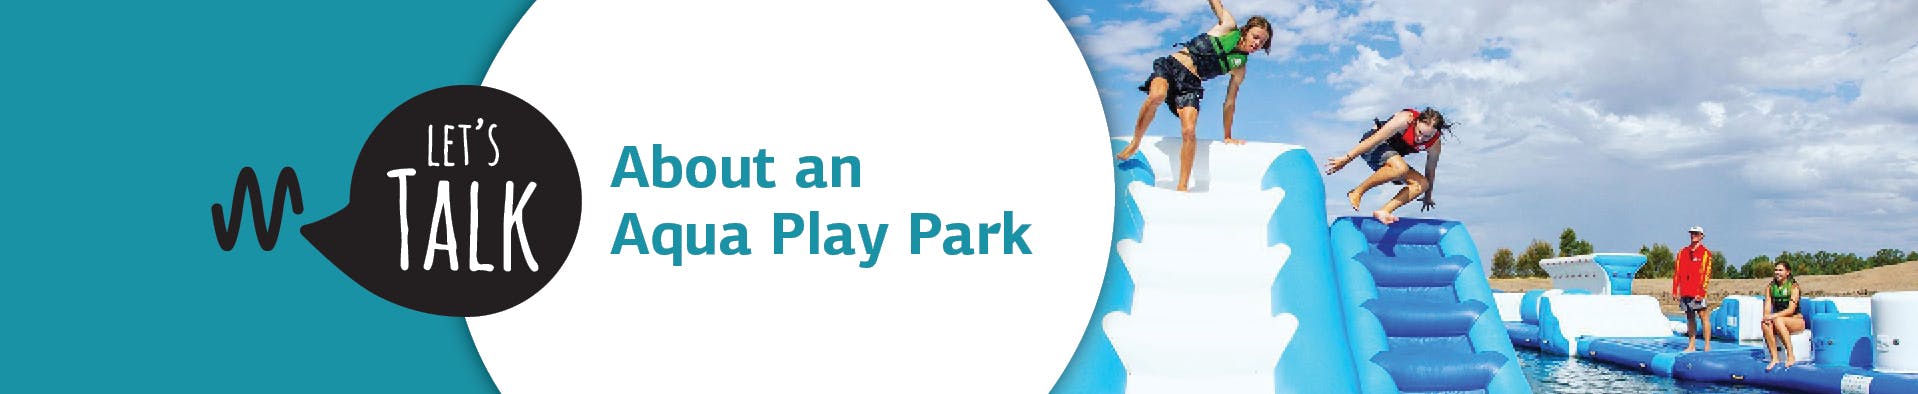 We want to know if the community support a proposal to install an aqua play park in Kaiapoi